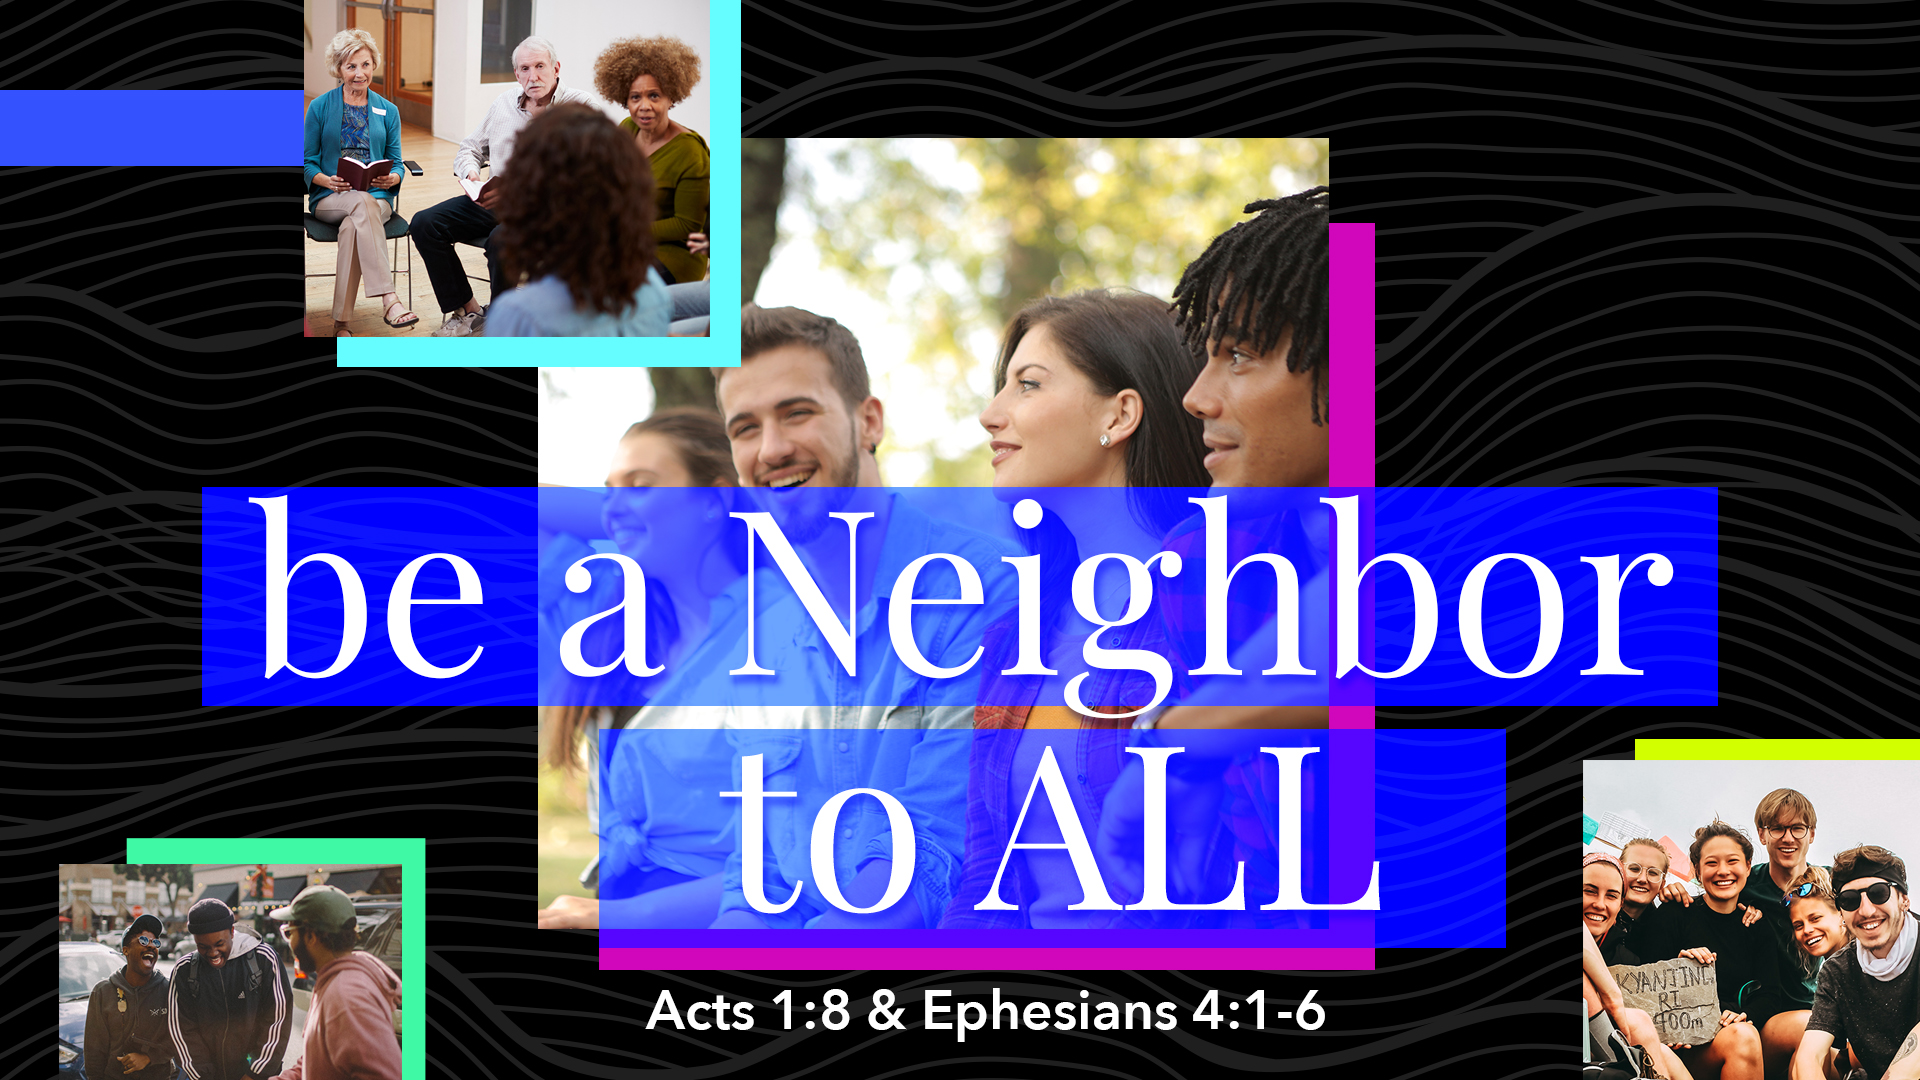 Be a Neighbor to All Image